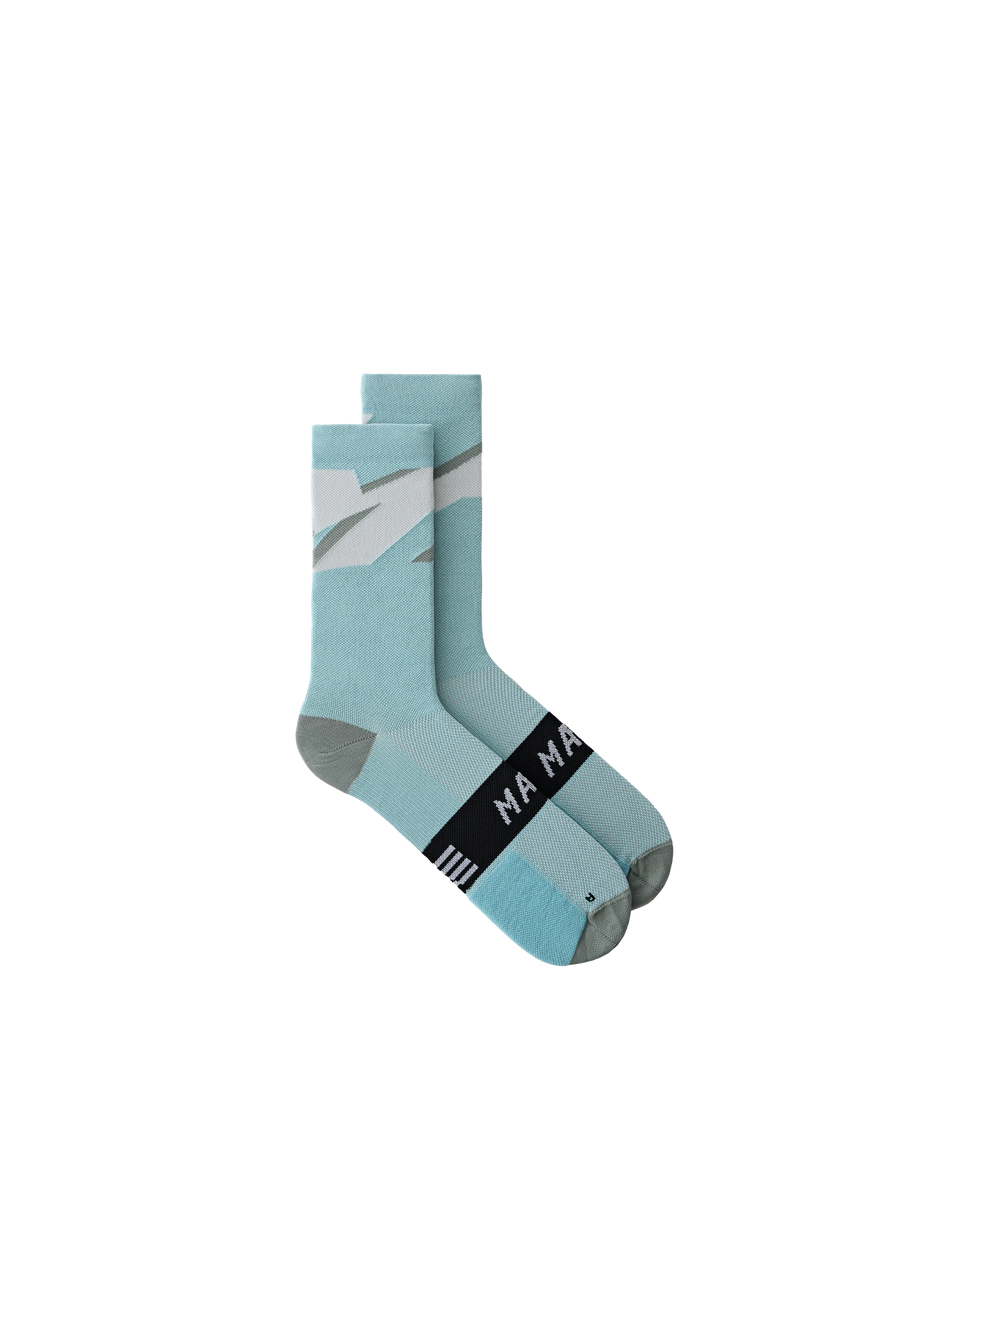 Product Image for Evolve Sock